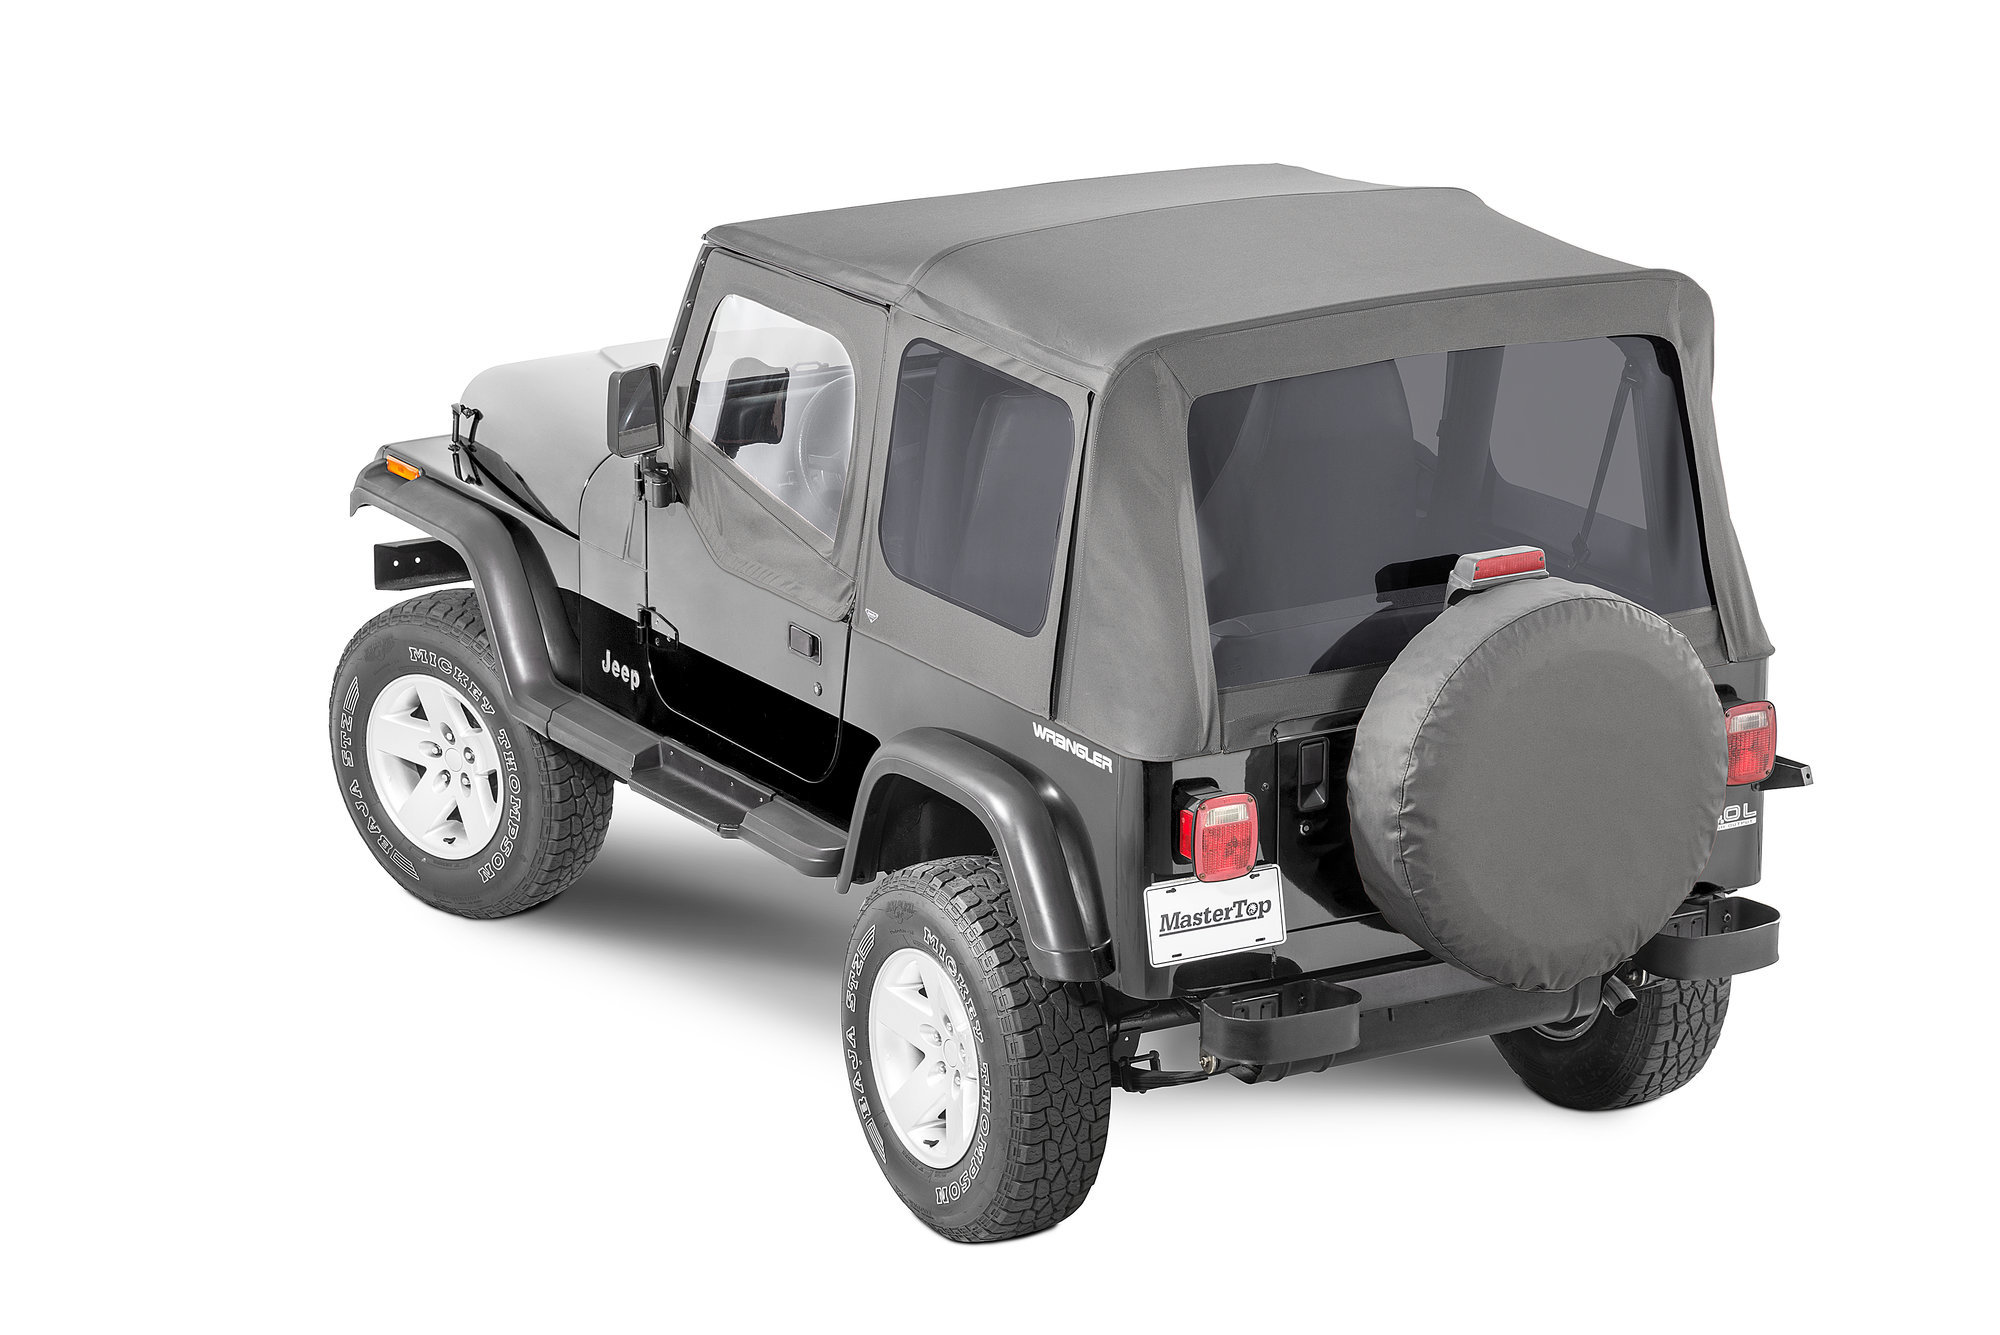 MasterTop Premium Replacement Soft Top with Tinted Windows for 88-95 Jeep  Wrangler YJ | Quadratec